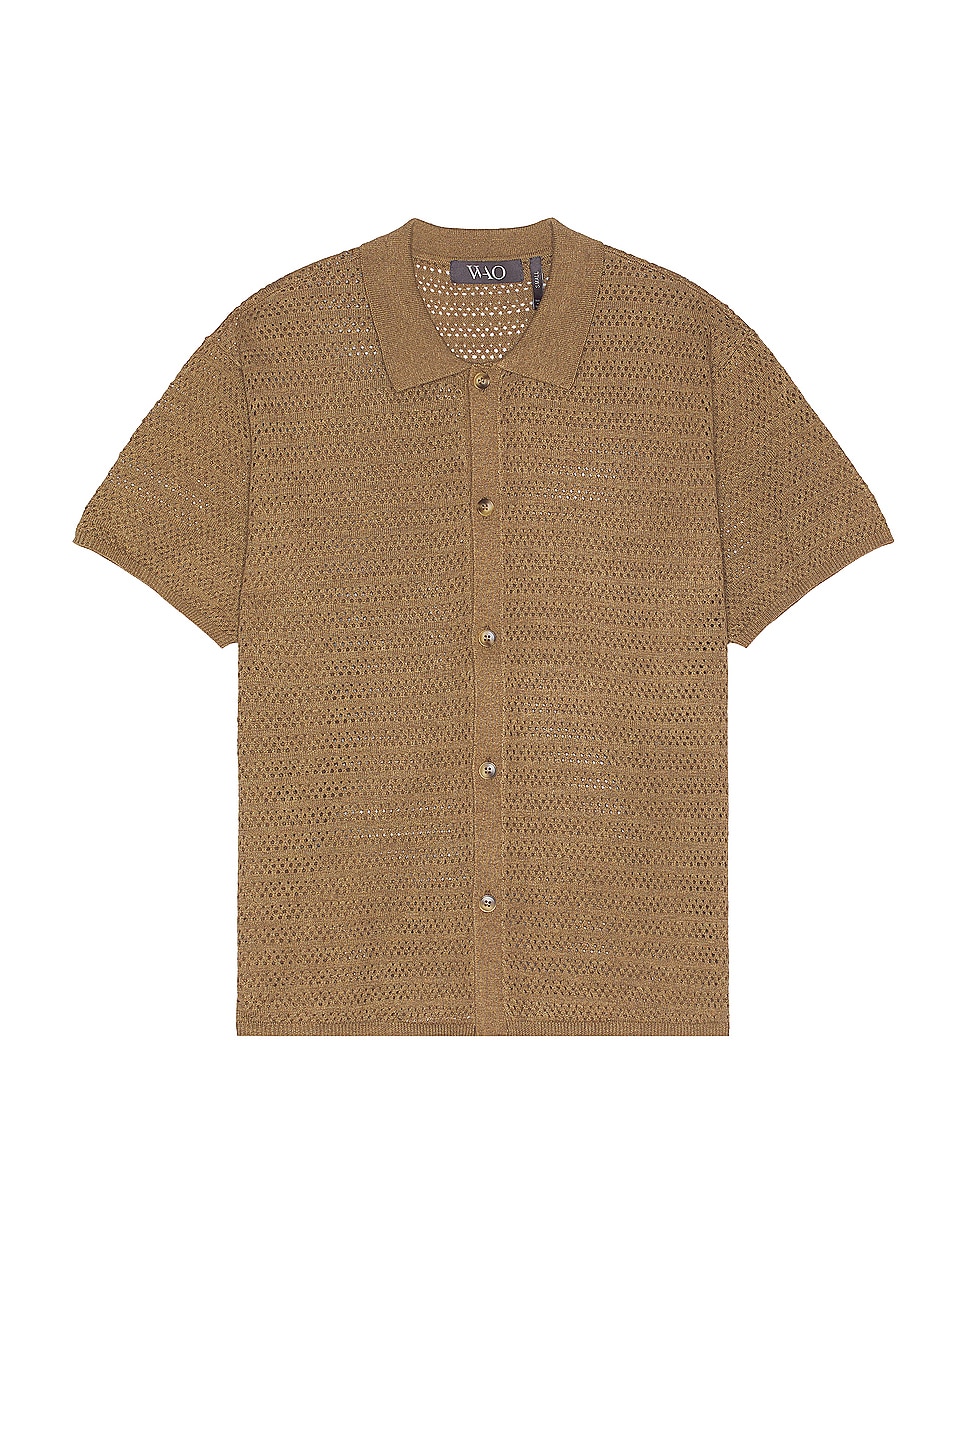 Image 1 of WAO Open Knit Short Sleeve Shirt in Taupe